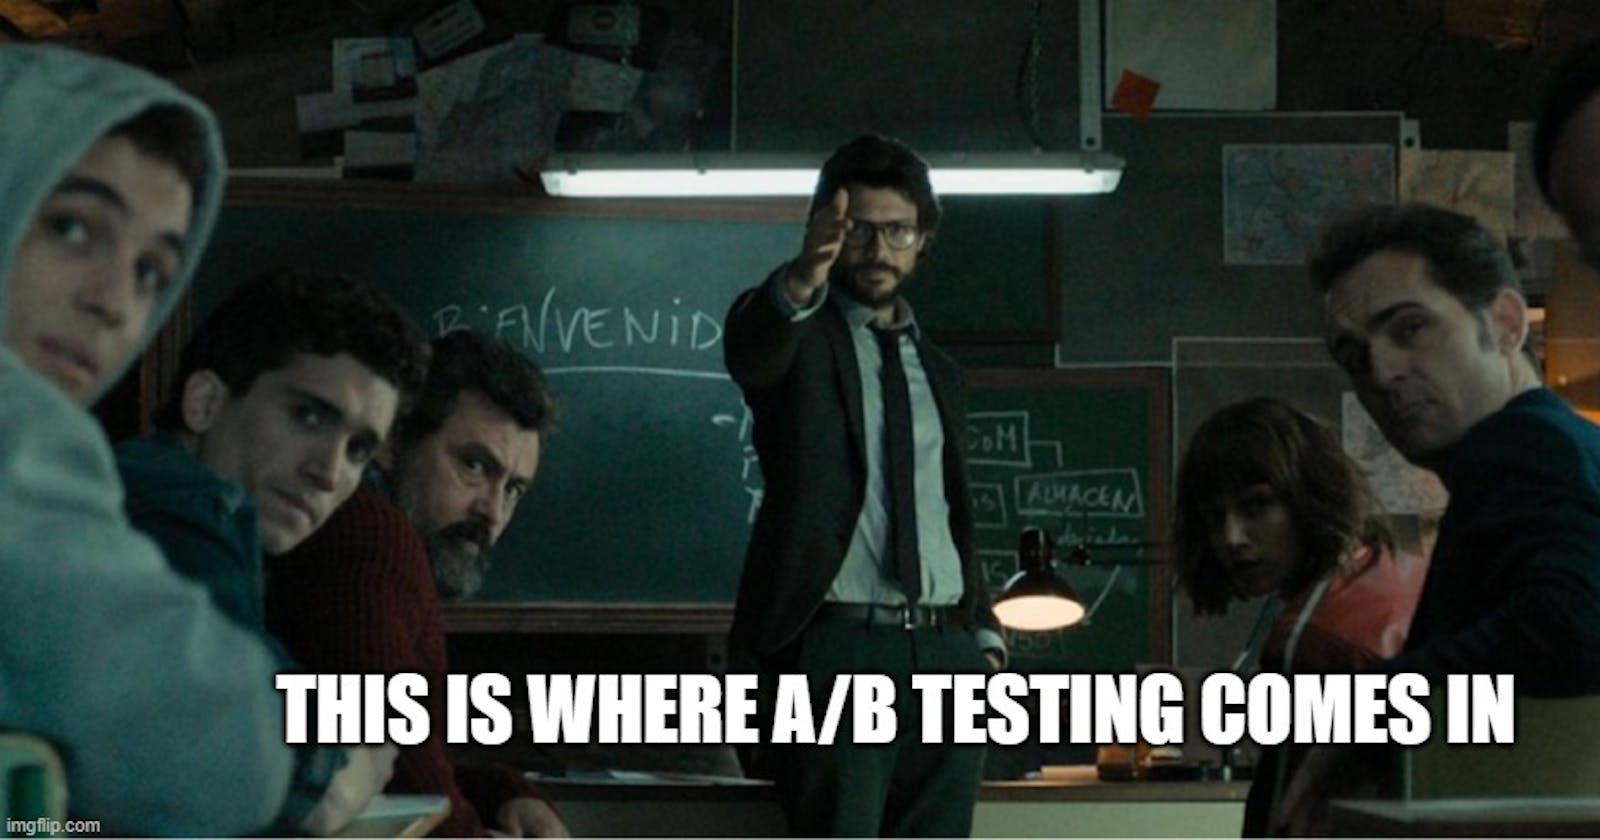 A/B Testing: Building Better Products Through Experiments